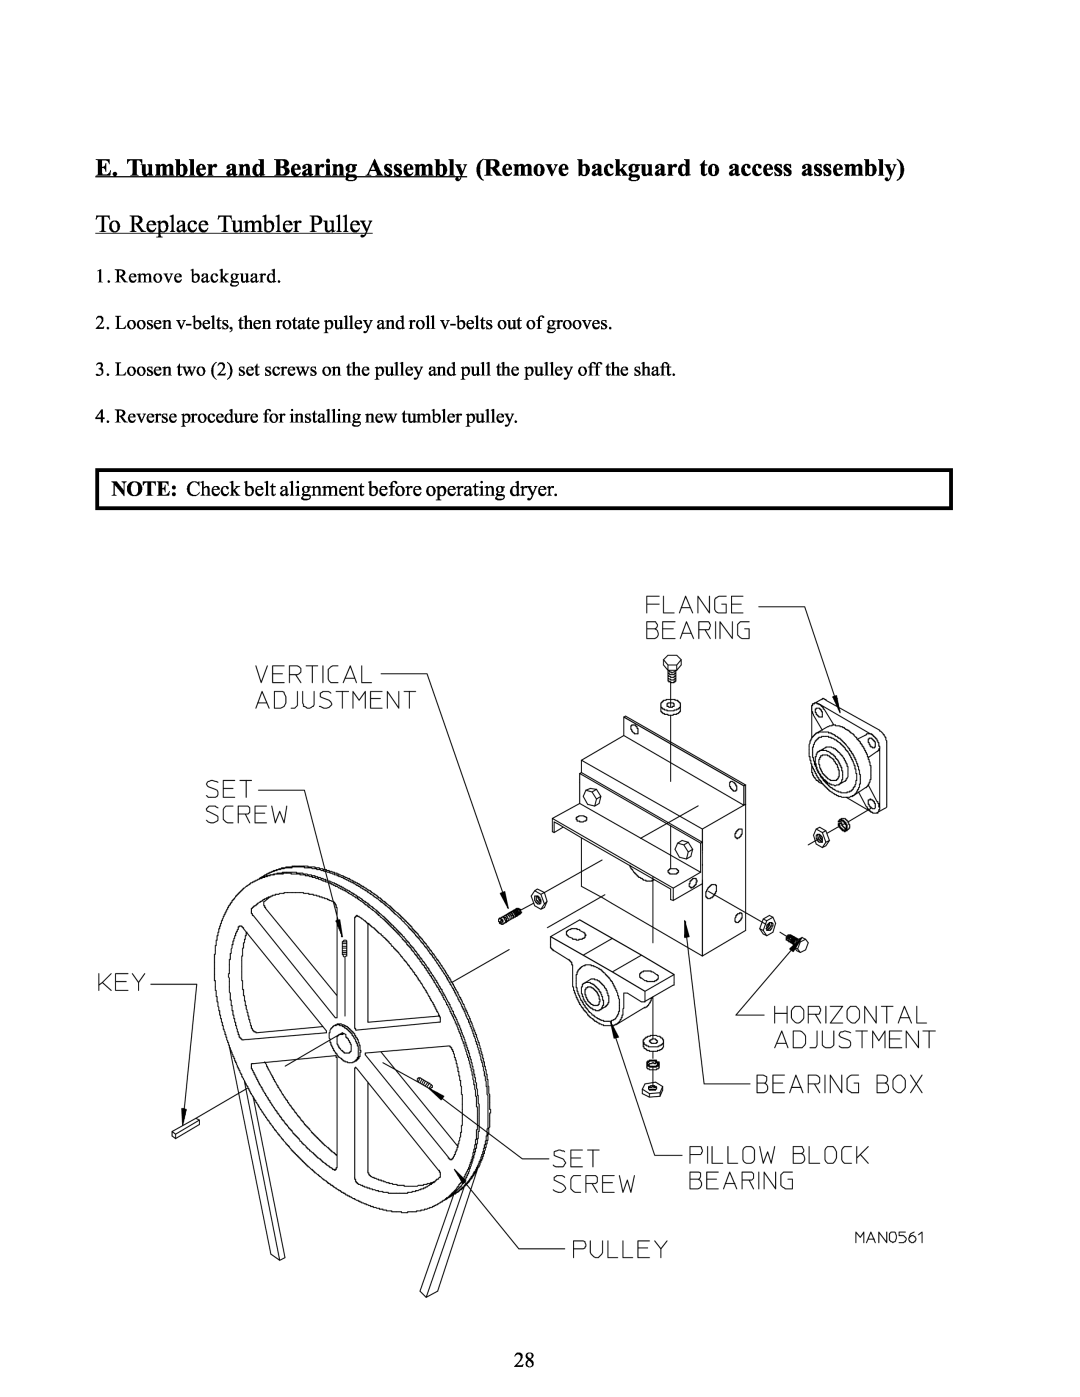 American Dryer Corp WDA-385 E. Tumbler and Bearing Assembly Remove backguard to access assembly, To Replace Tumbler Pulley 